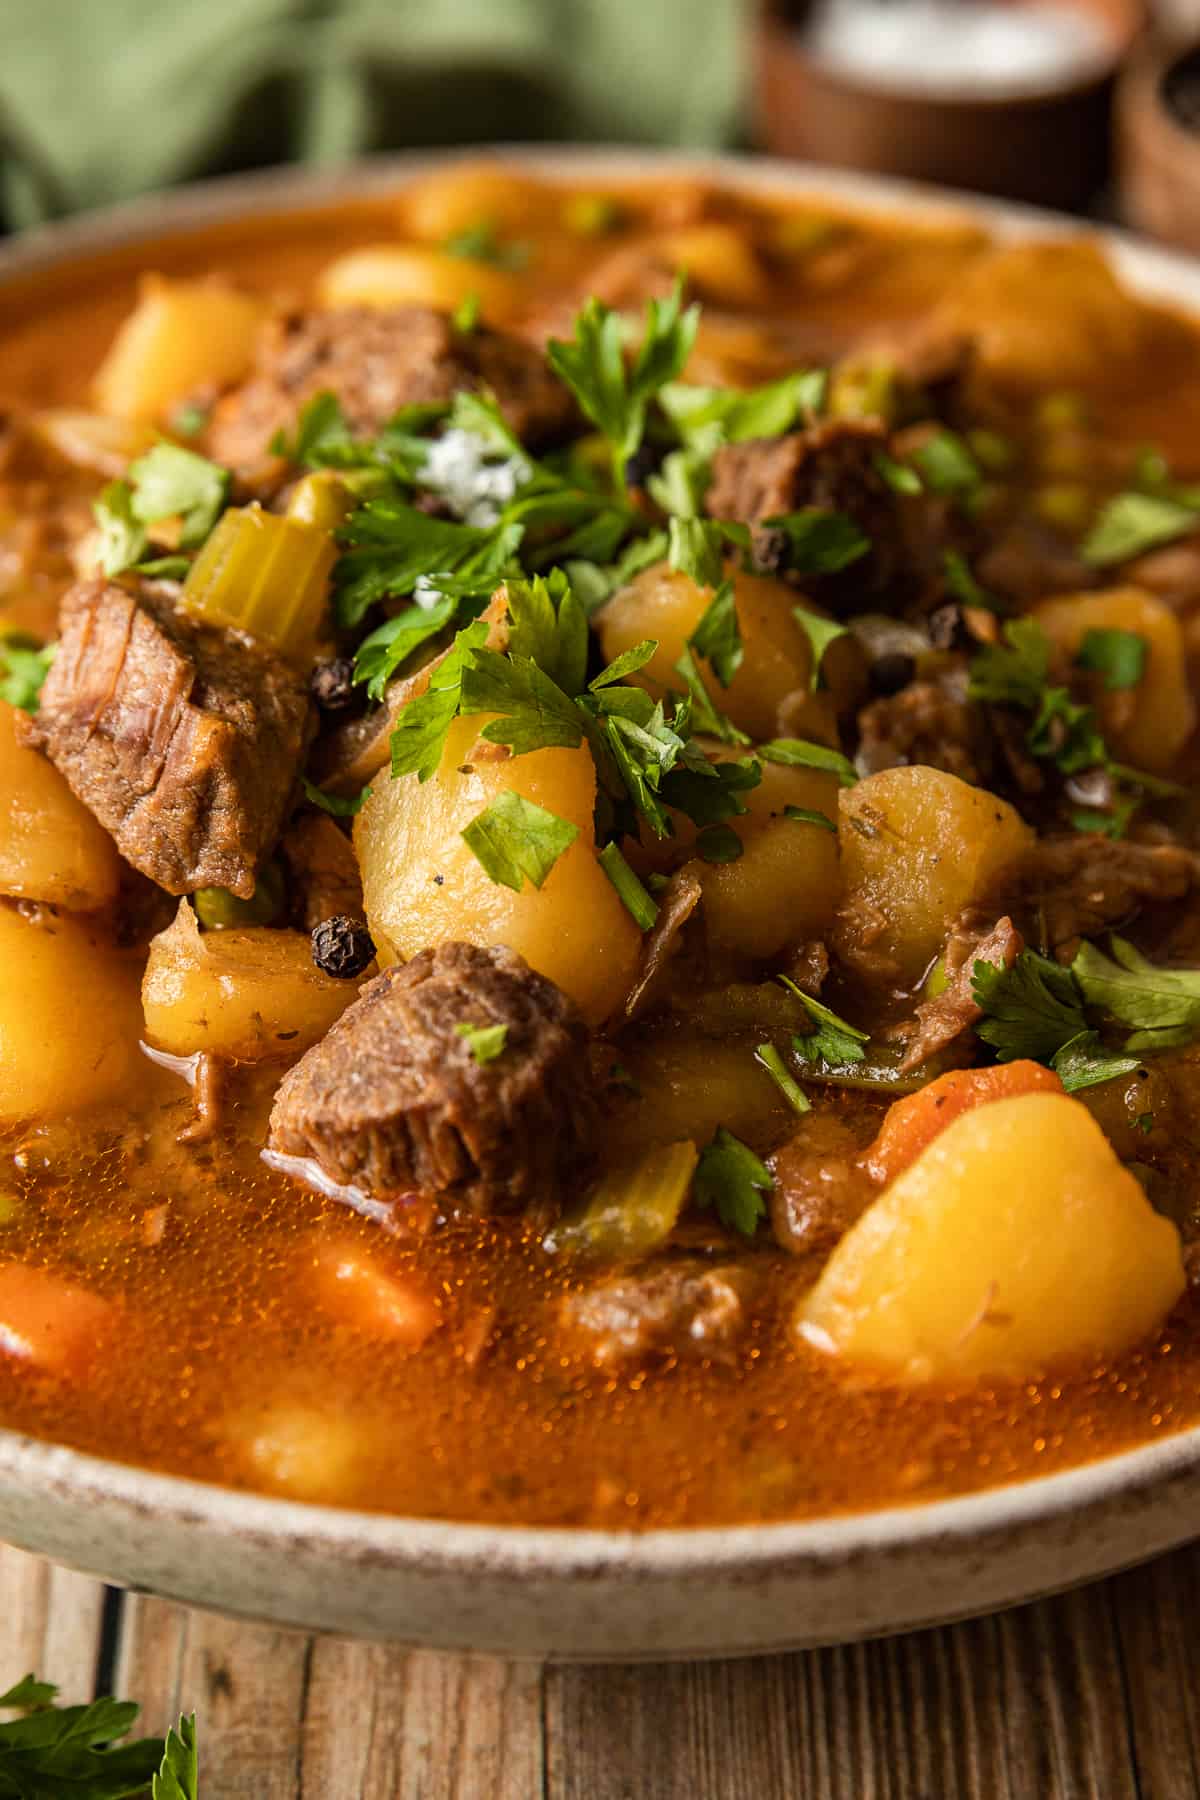 A close up view of beef stew with chuck roast and potatoes in a serving bowl topped with parsley.